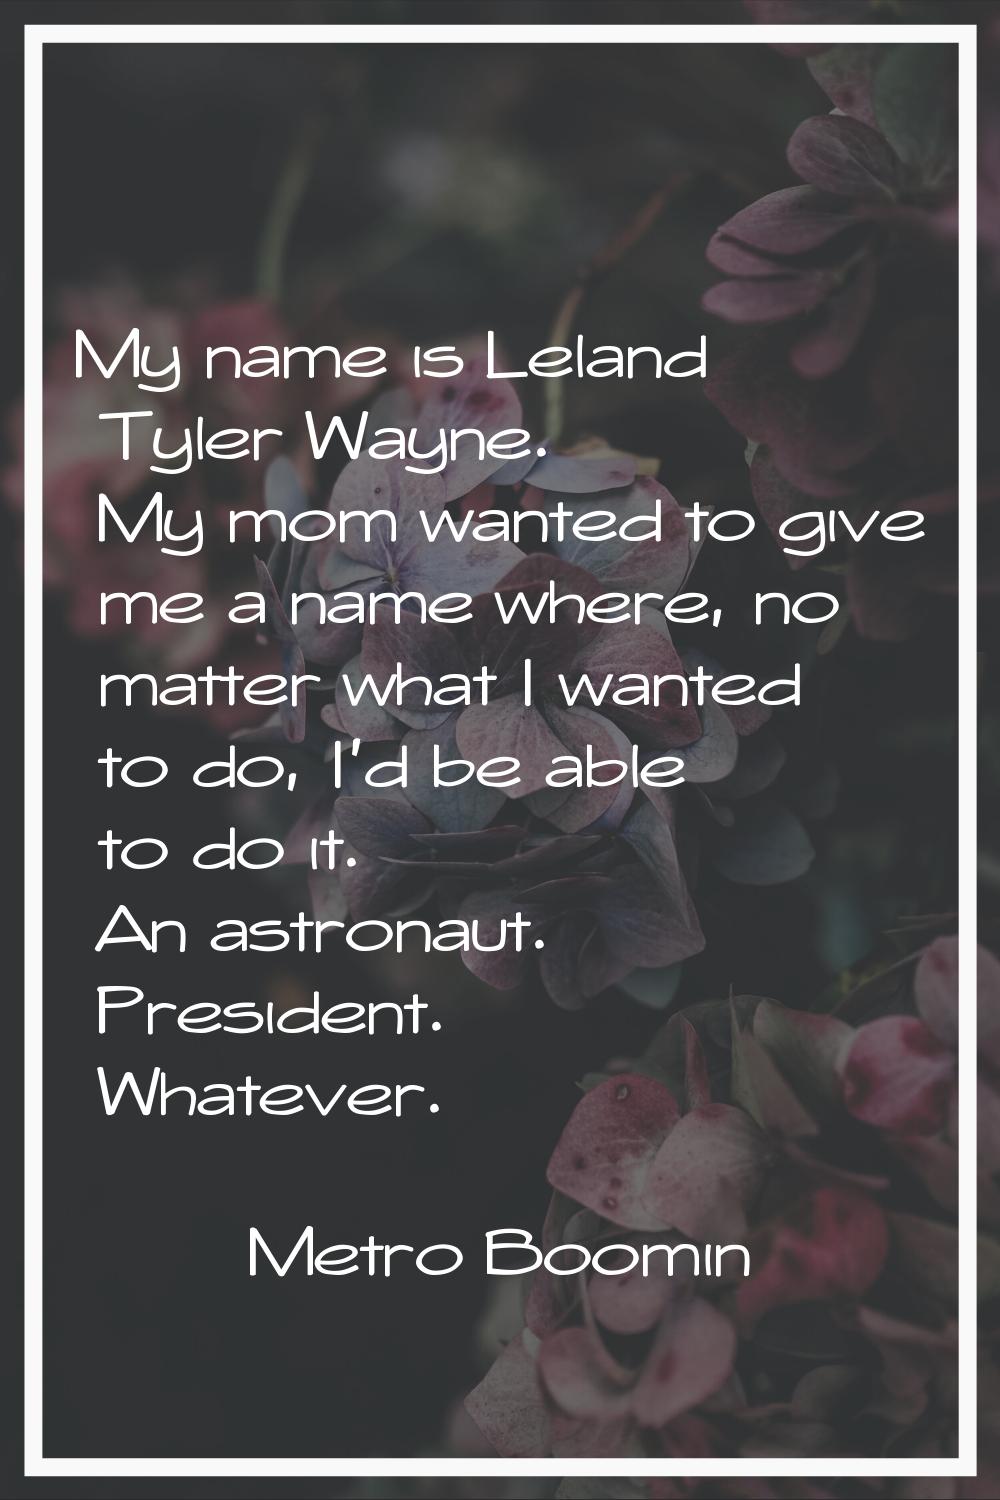 My name is Leland Tyler Wayne. My mom wanted to give me a name where, no matter what I wanted to do